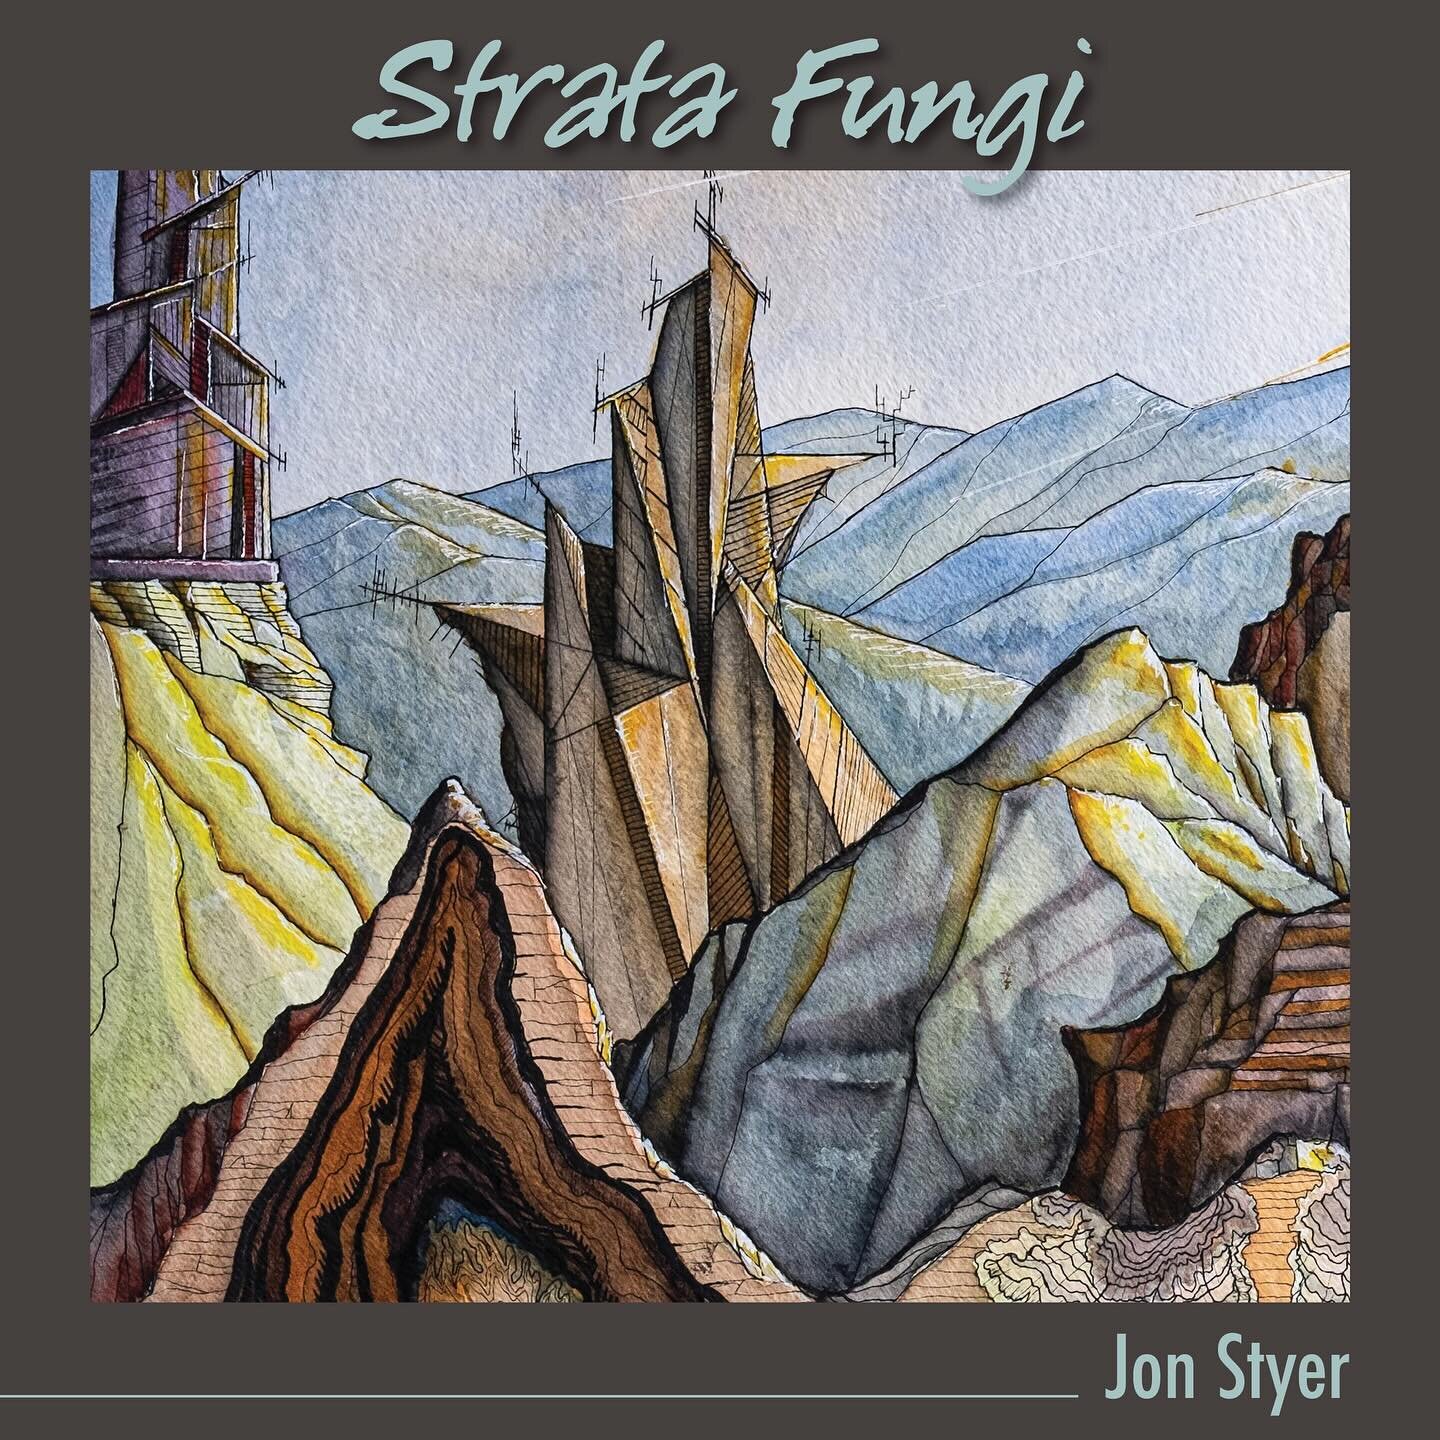 Also coming up in March is Strata Fungi by local artist Jon Styer in our Equinox Galllery. These watercolor with pen and ink pieces are a fantasy dreamscape that can only be truly appreciated up close and personal. Come join us on Friday, March 1st f